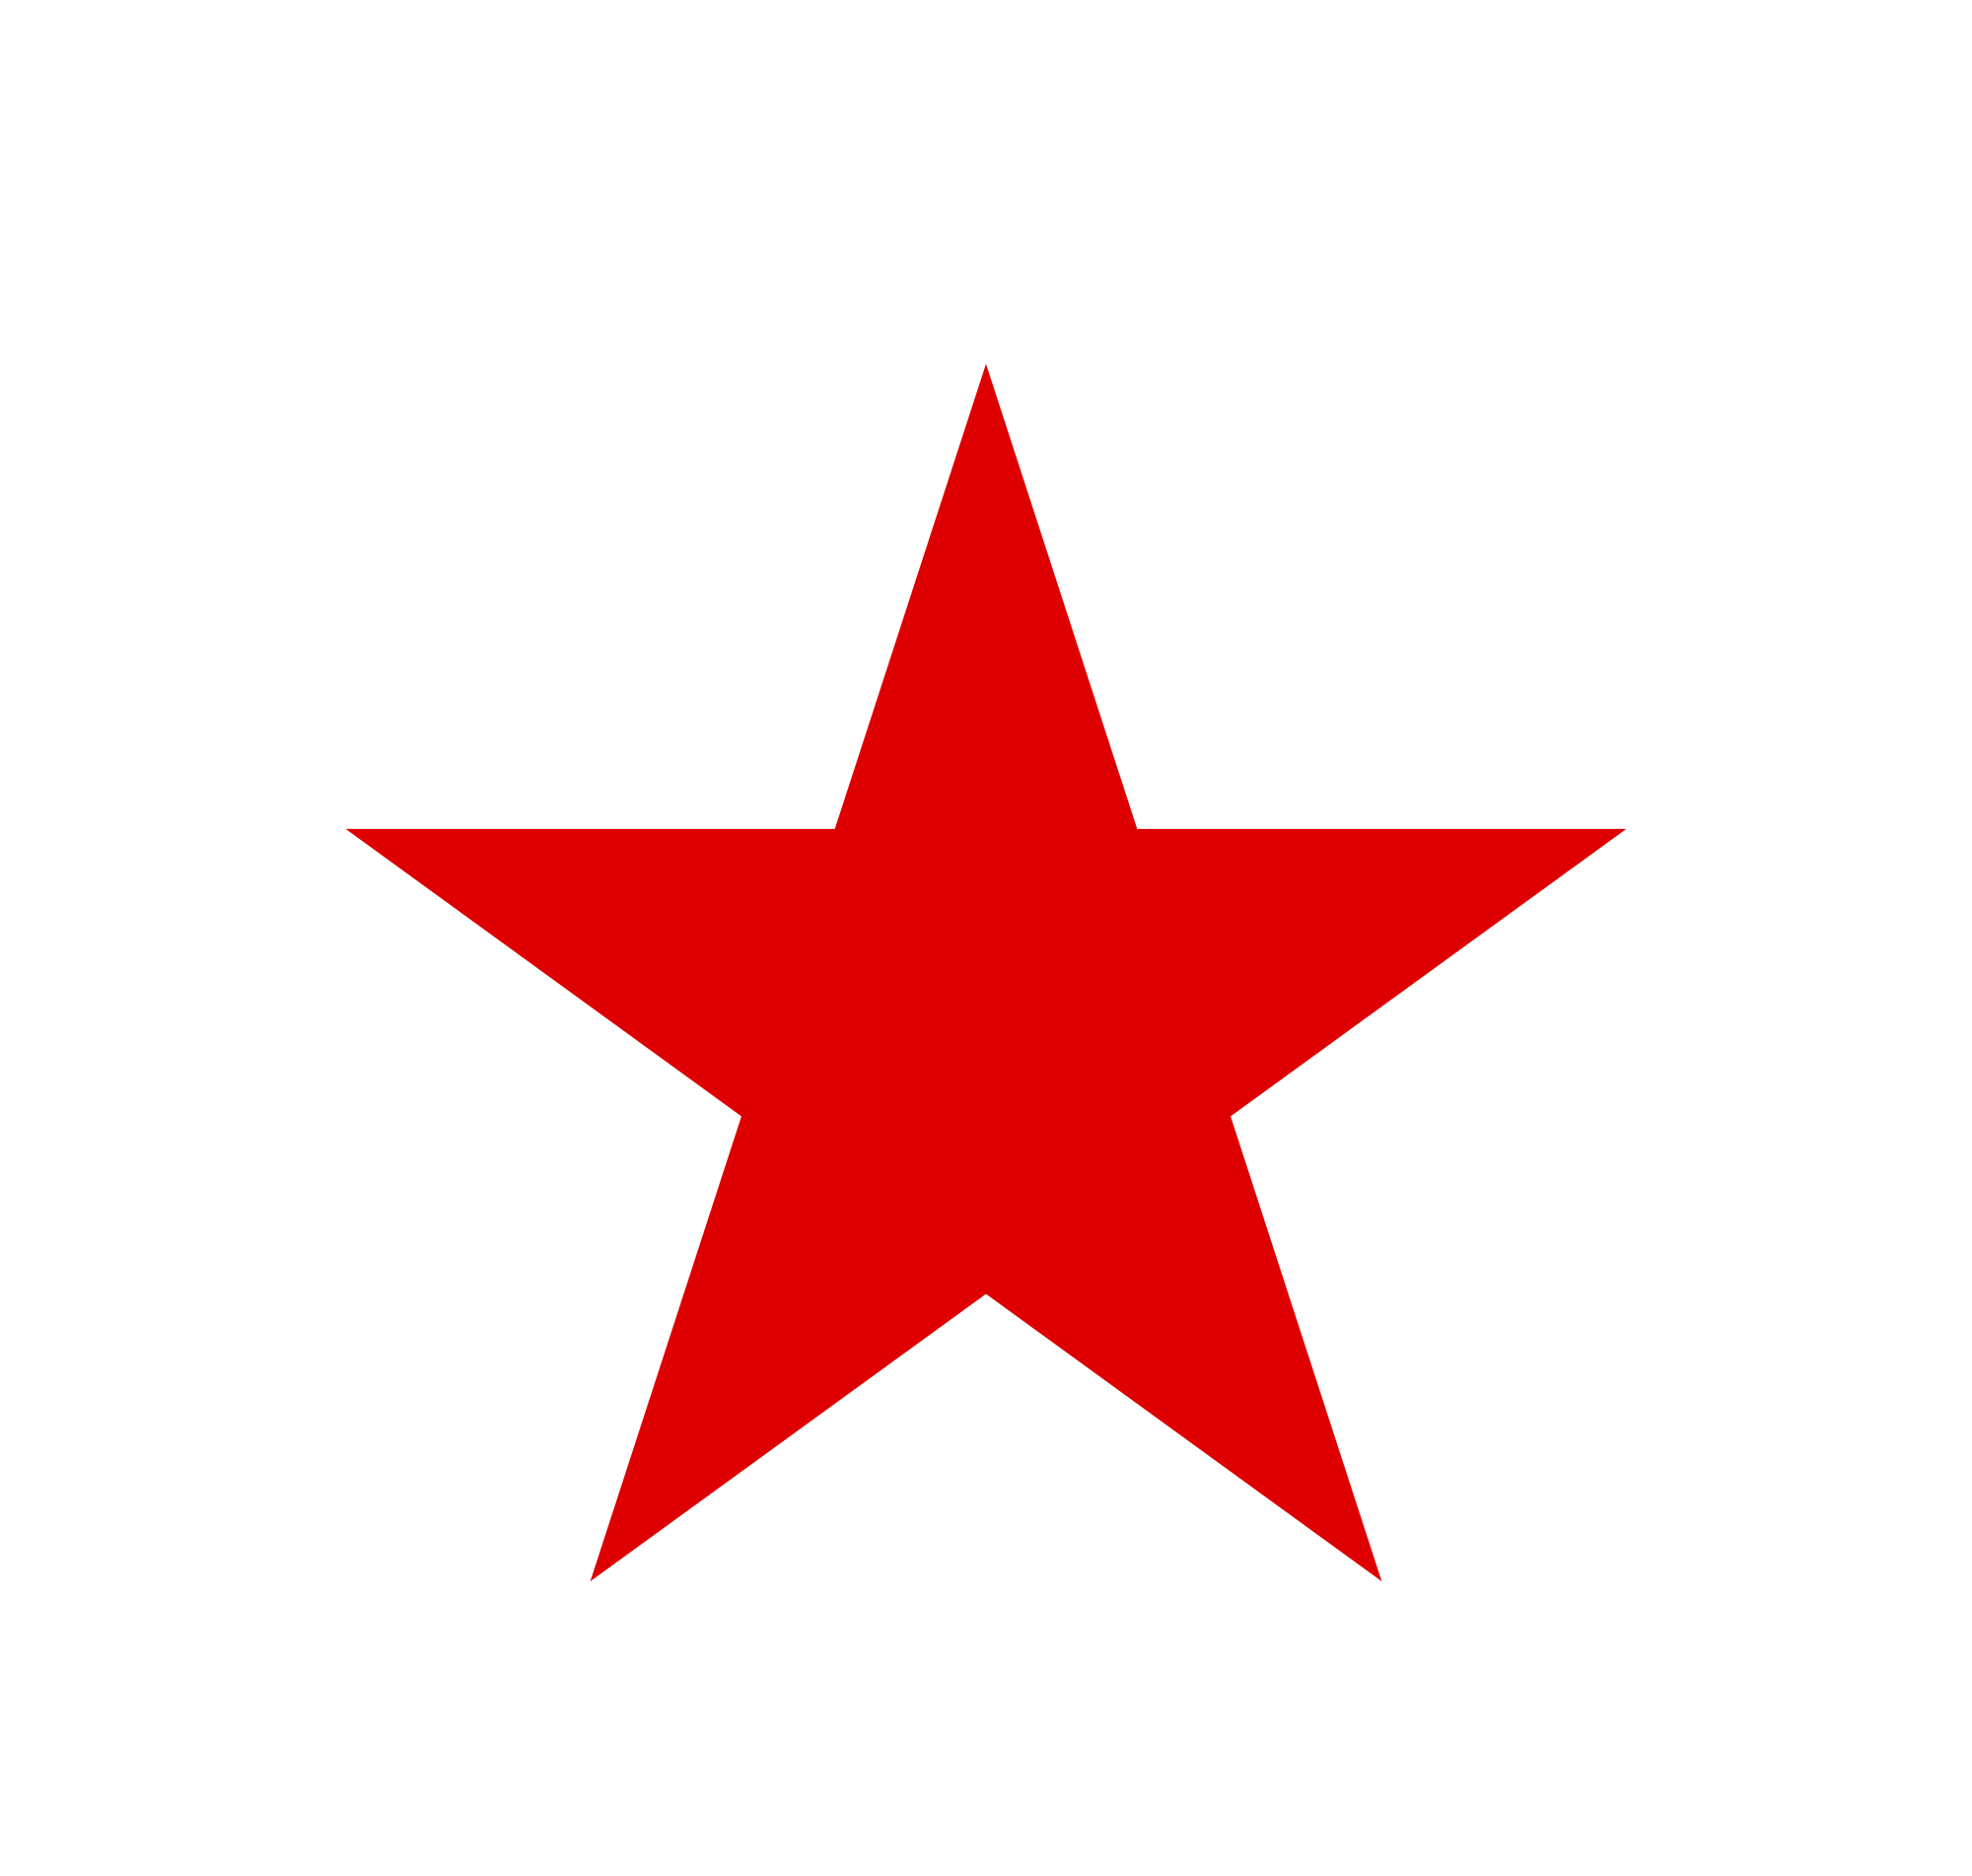 White and Red Star Logo - File:URSS aviation white bordered red star.svg - Wikimedia Commons